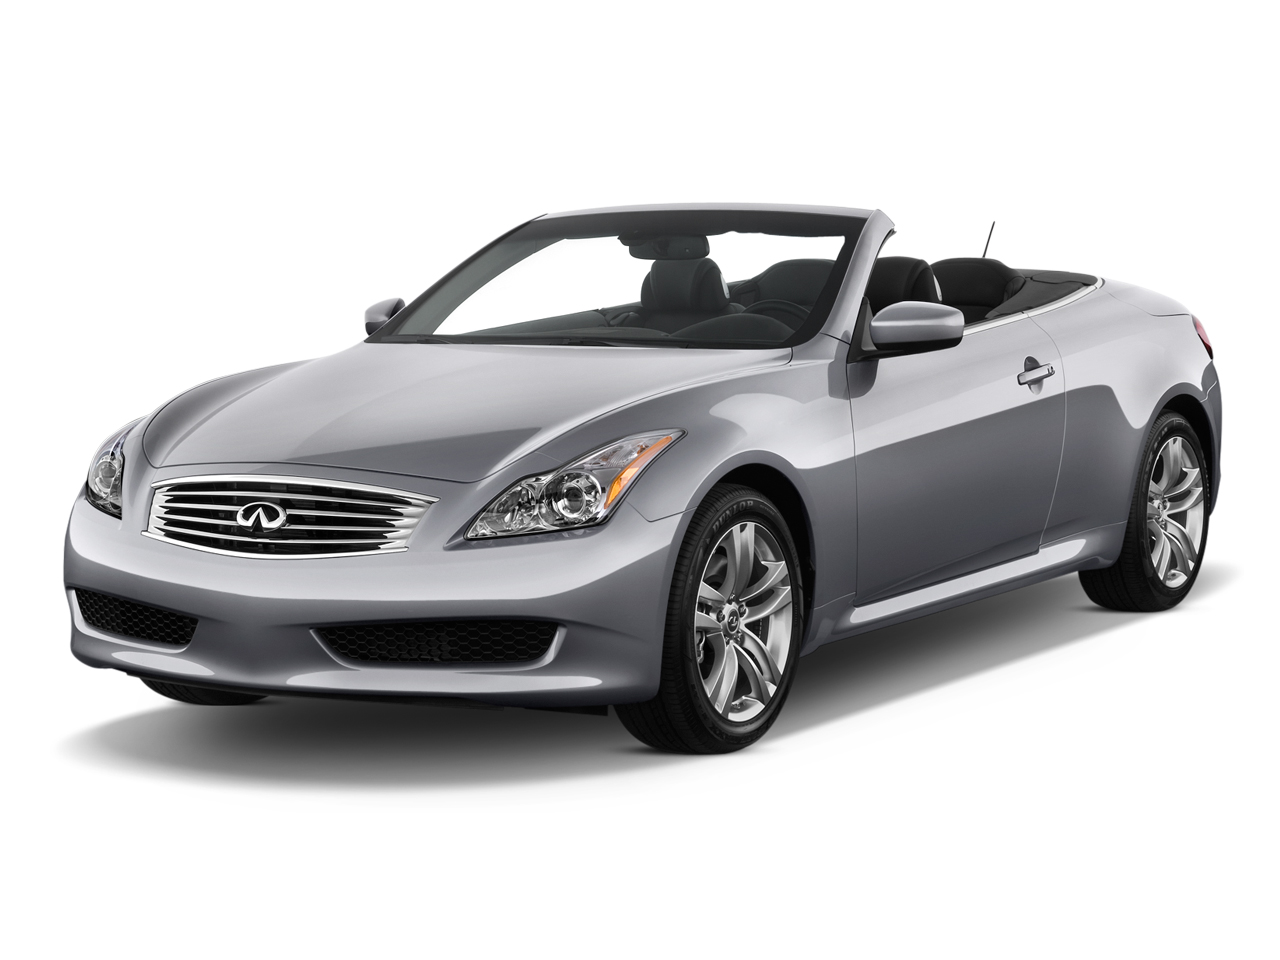 2010 INFINITI G37 Convertible Review, Ratings, Specs, Prices, and